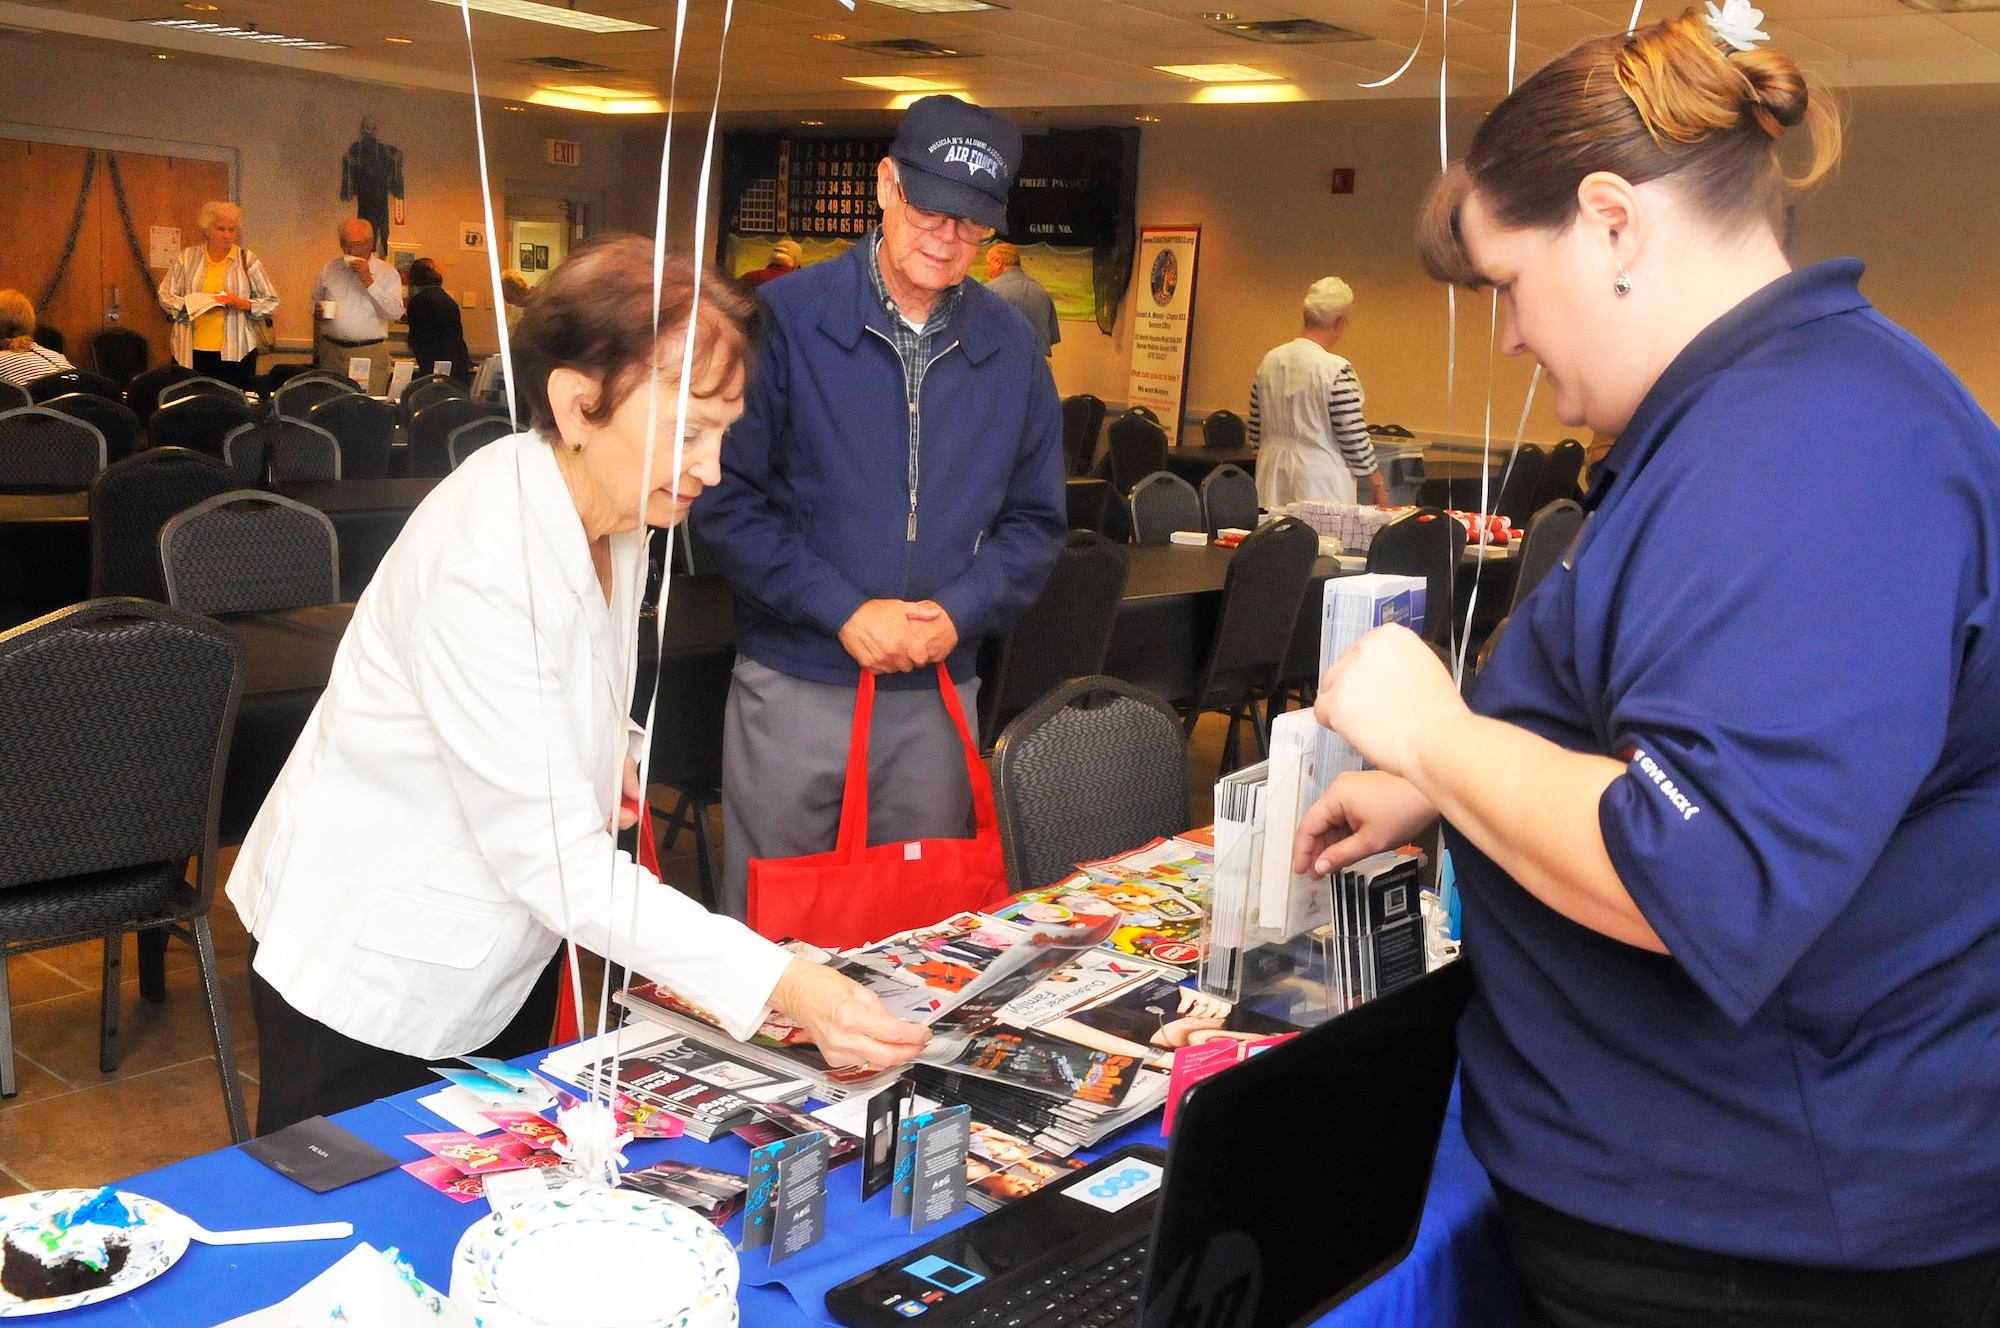 Retired Air Force Chief Master Sgt. Gene Salyer and his wife Betty, at left, gather some information from Bobbie Harmon at the Base Exchange table  during Robins’ Retiree Appreciation Day, Saturday, for military retirees from all branches of service and their guests.The appreciation day was to inform, assist and honor all retired military members, spouses and surviving spouses, and their family members with base access. (U. S. Air Force photo/Sue Sapp)